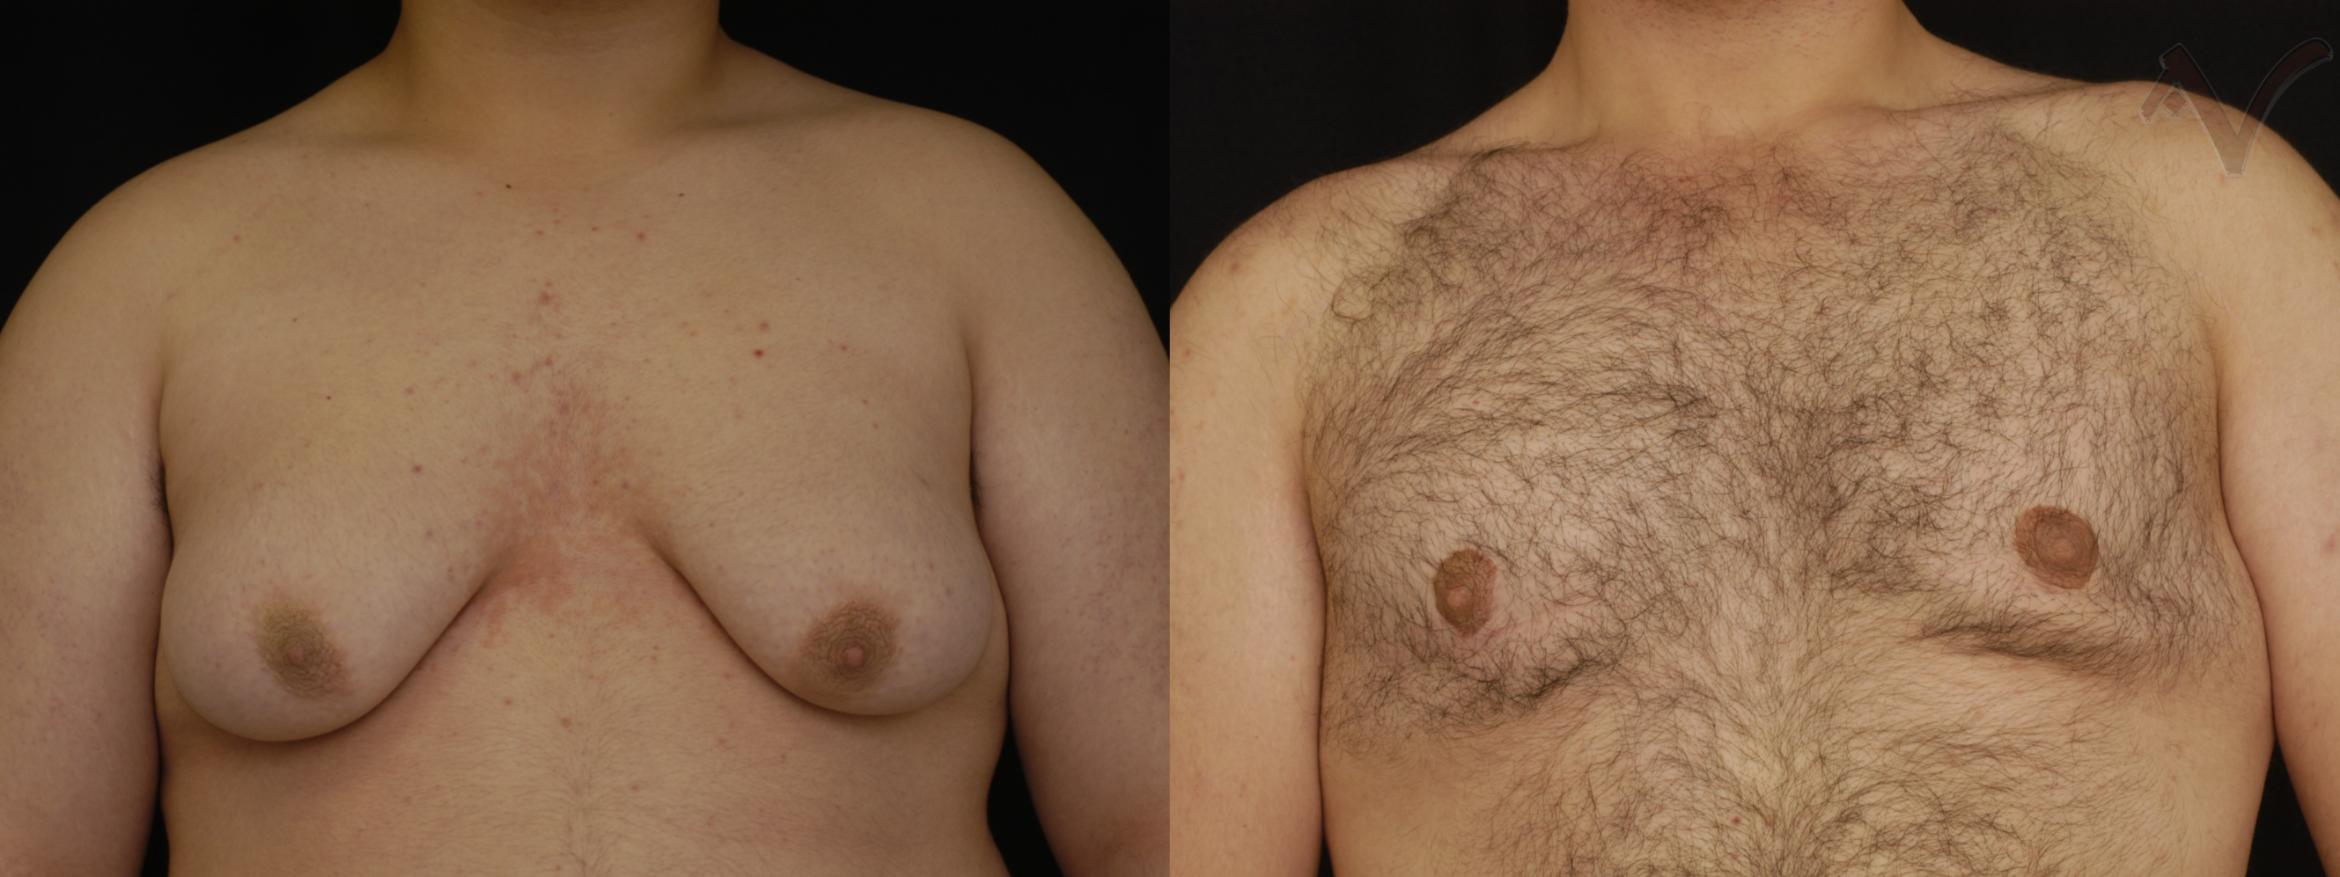 Before & After Male Breast Reduction Case 100 Front View in Burbank, CA